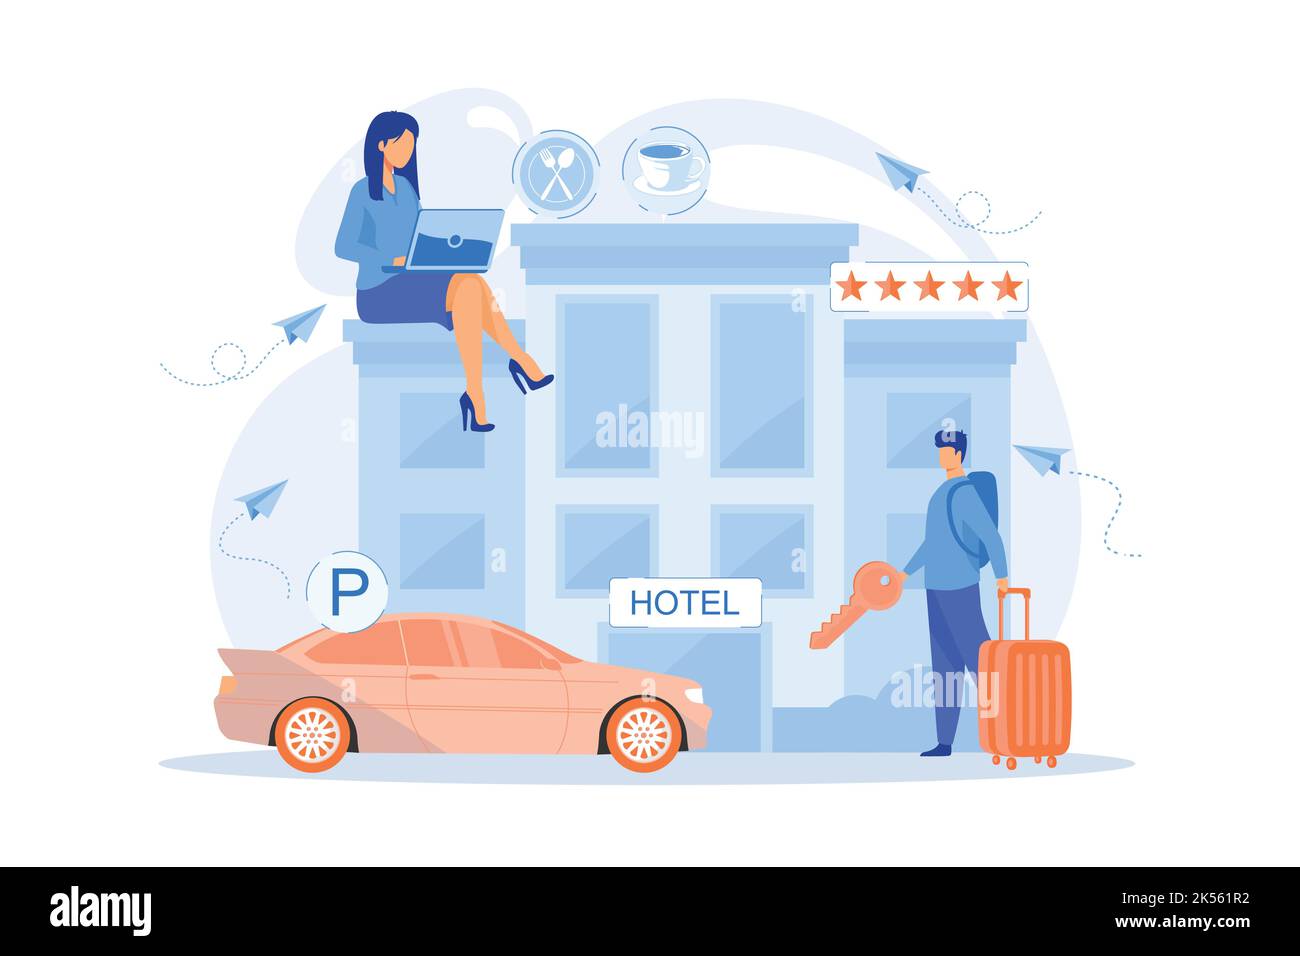 Business people at hotel use all included services, lodgings and wifi. All-inclusive hotel, luxury hospitality resort, all included service concept. Stock Vector